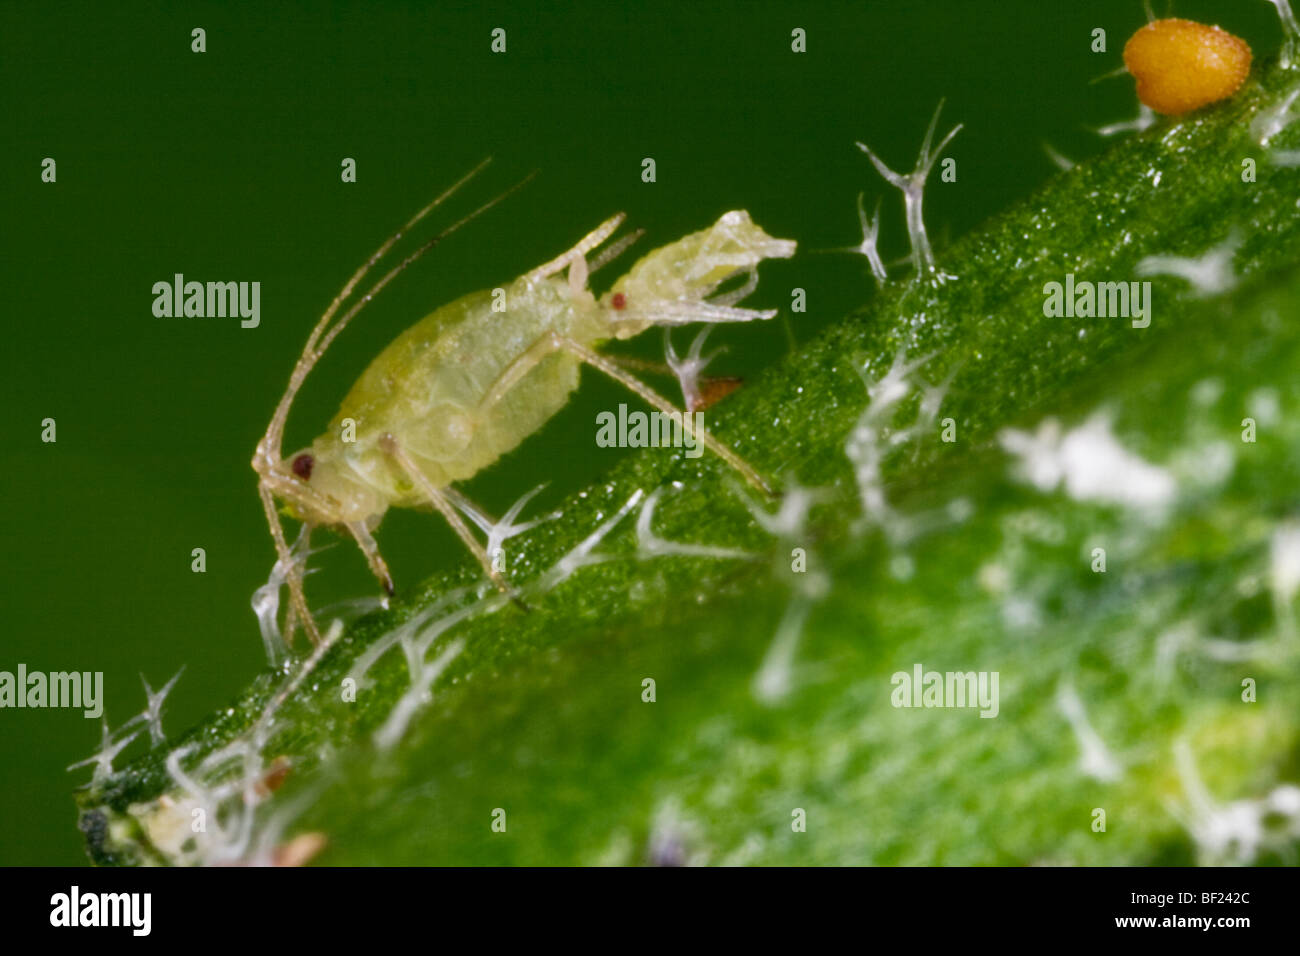 Agriculture - Green peach aphid adult female (Myzus persicae) giving live birth on a leaf, side view / California, USA. Stock Photo